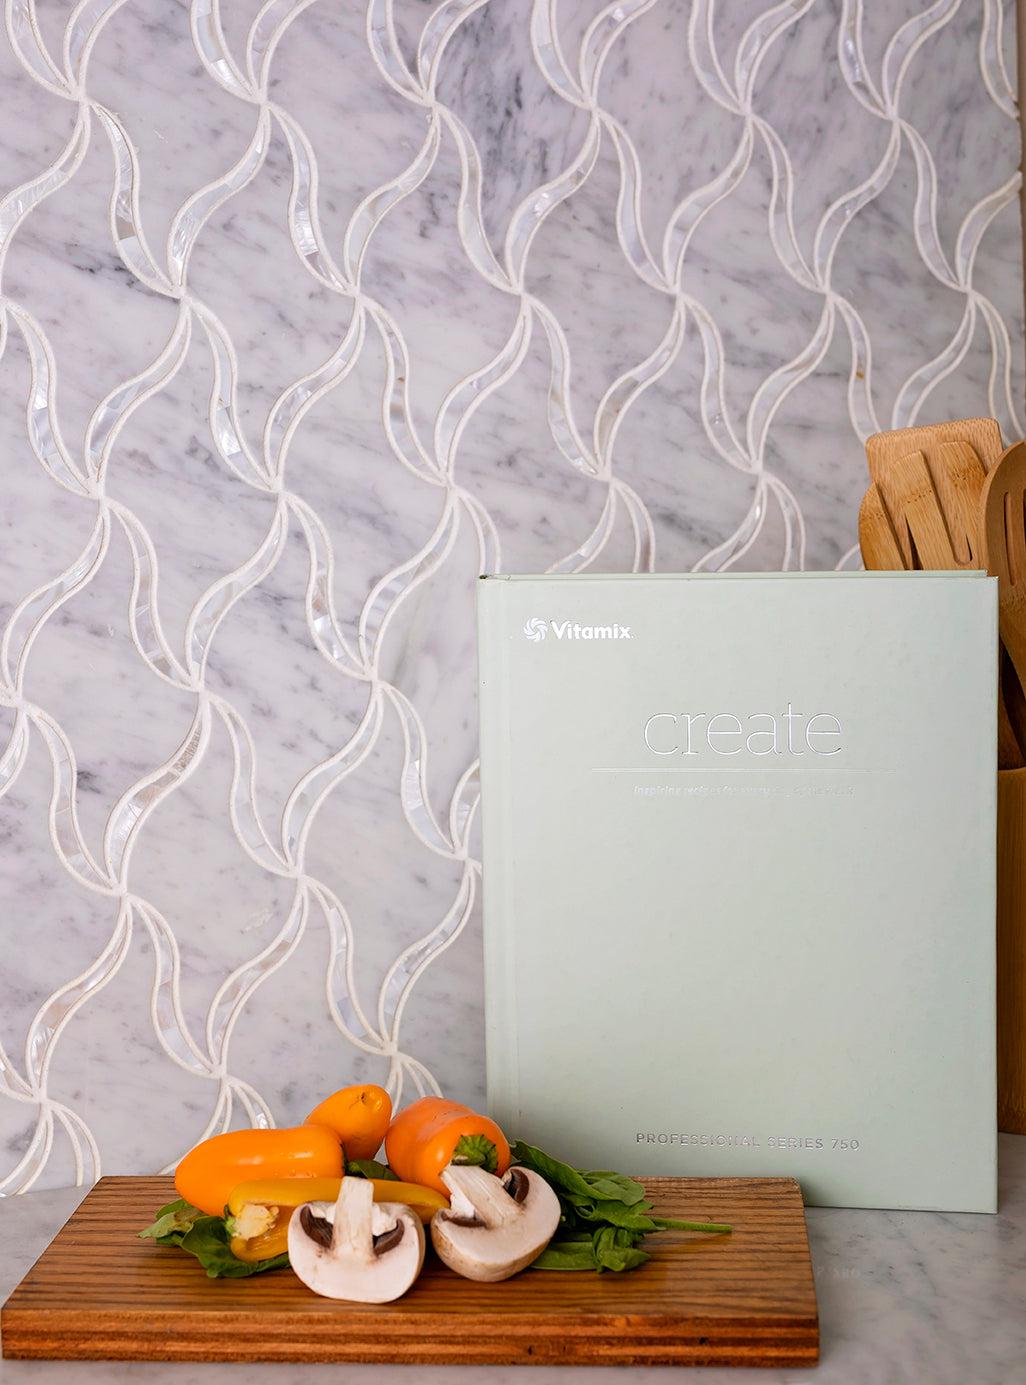 Pearl Ribbon White Marble & Mother Of Pearl Waterjet Mosaic Tile for a Patterned Kitchen Backsplash